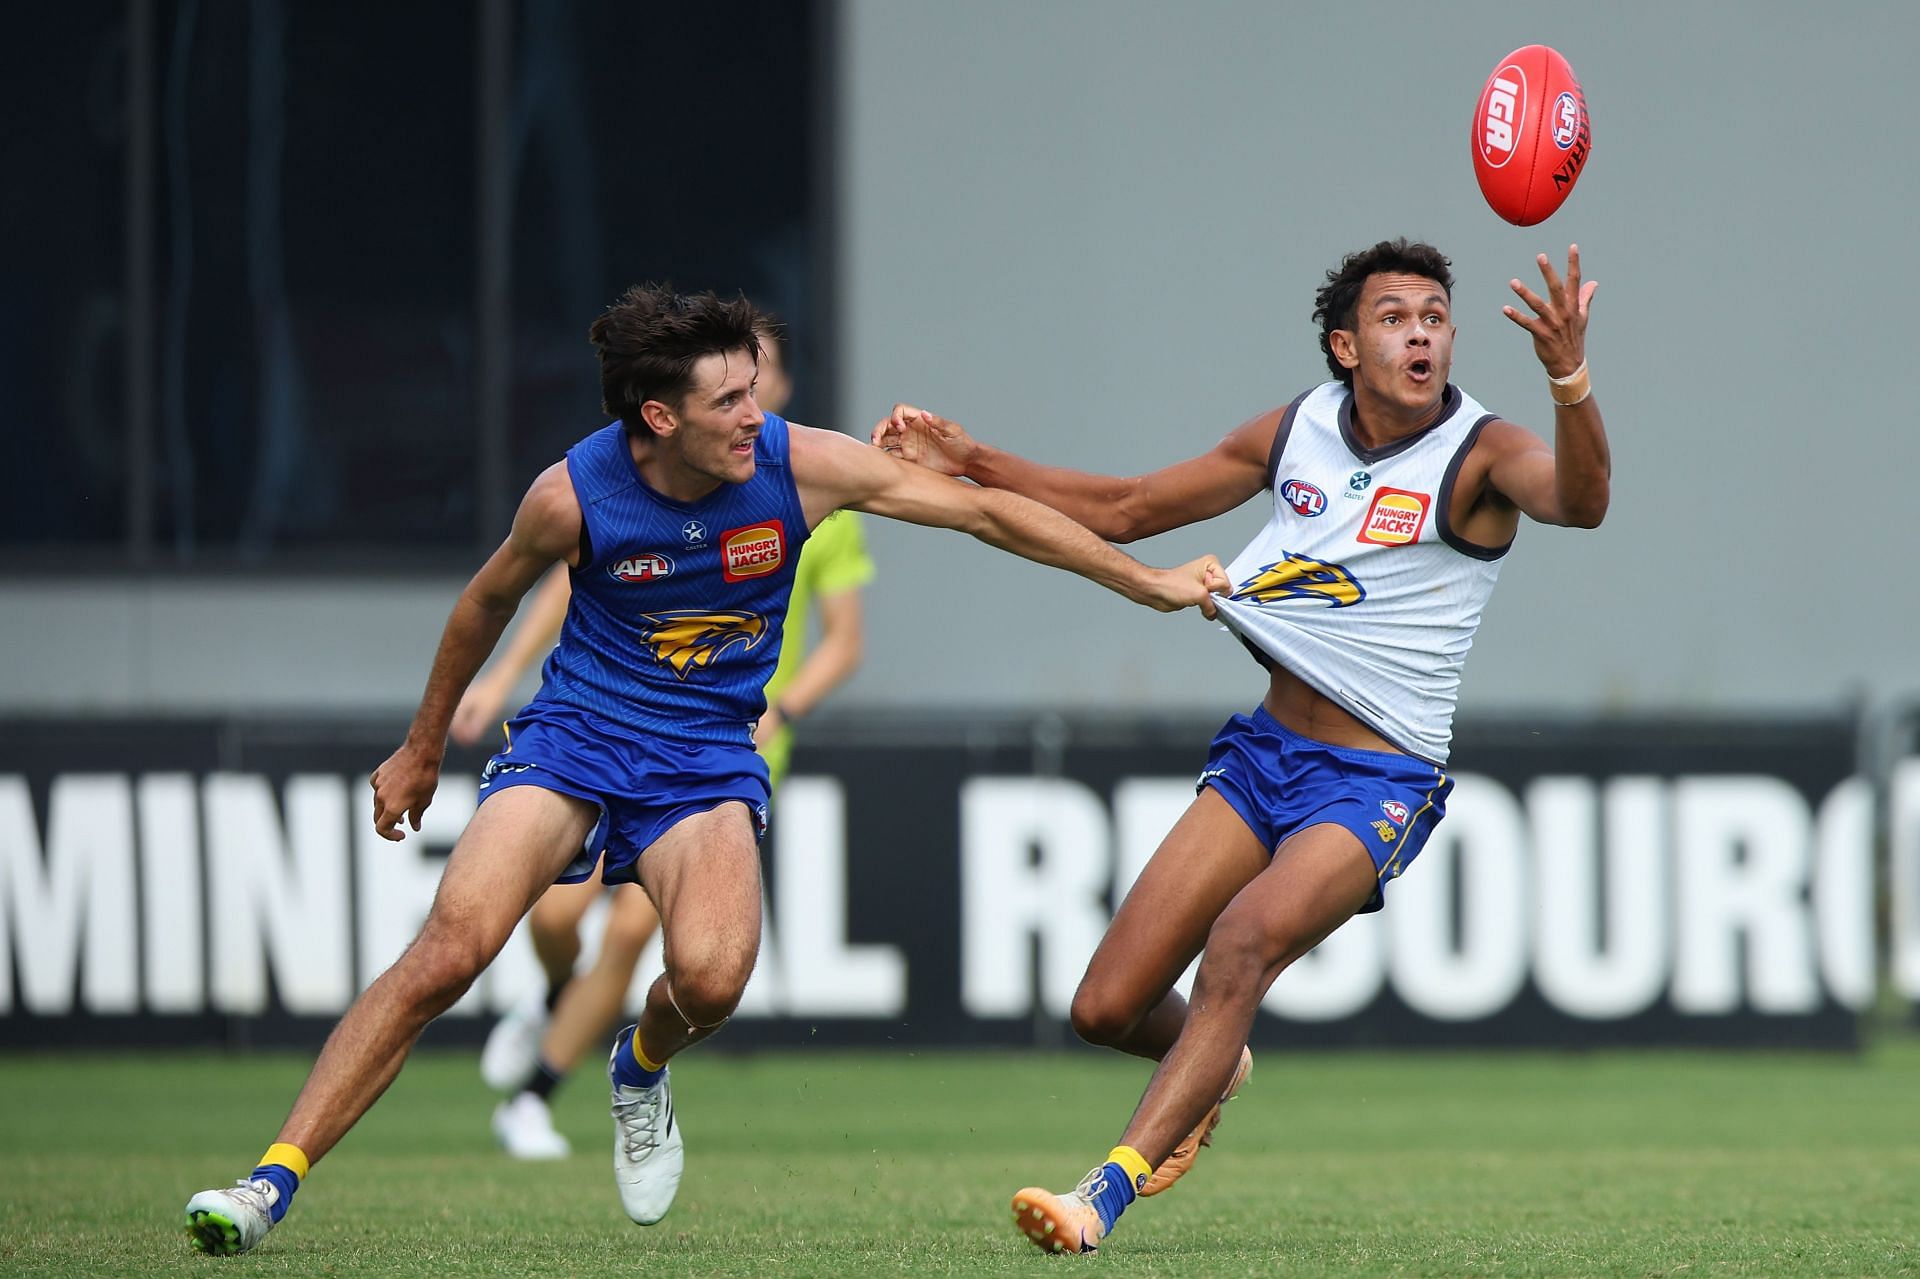 Tyrell Dewar of the Eagles reaches for the ball during West Coast Eagles Intra Club Match